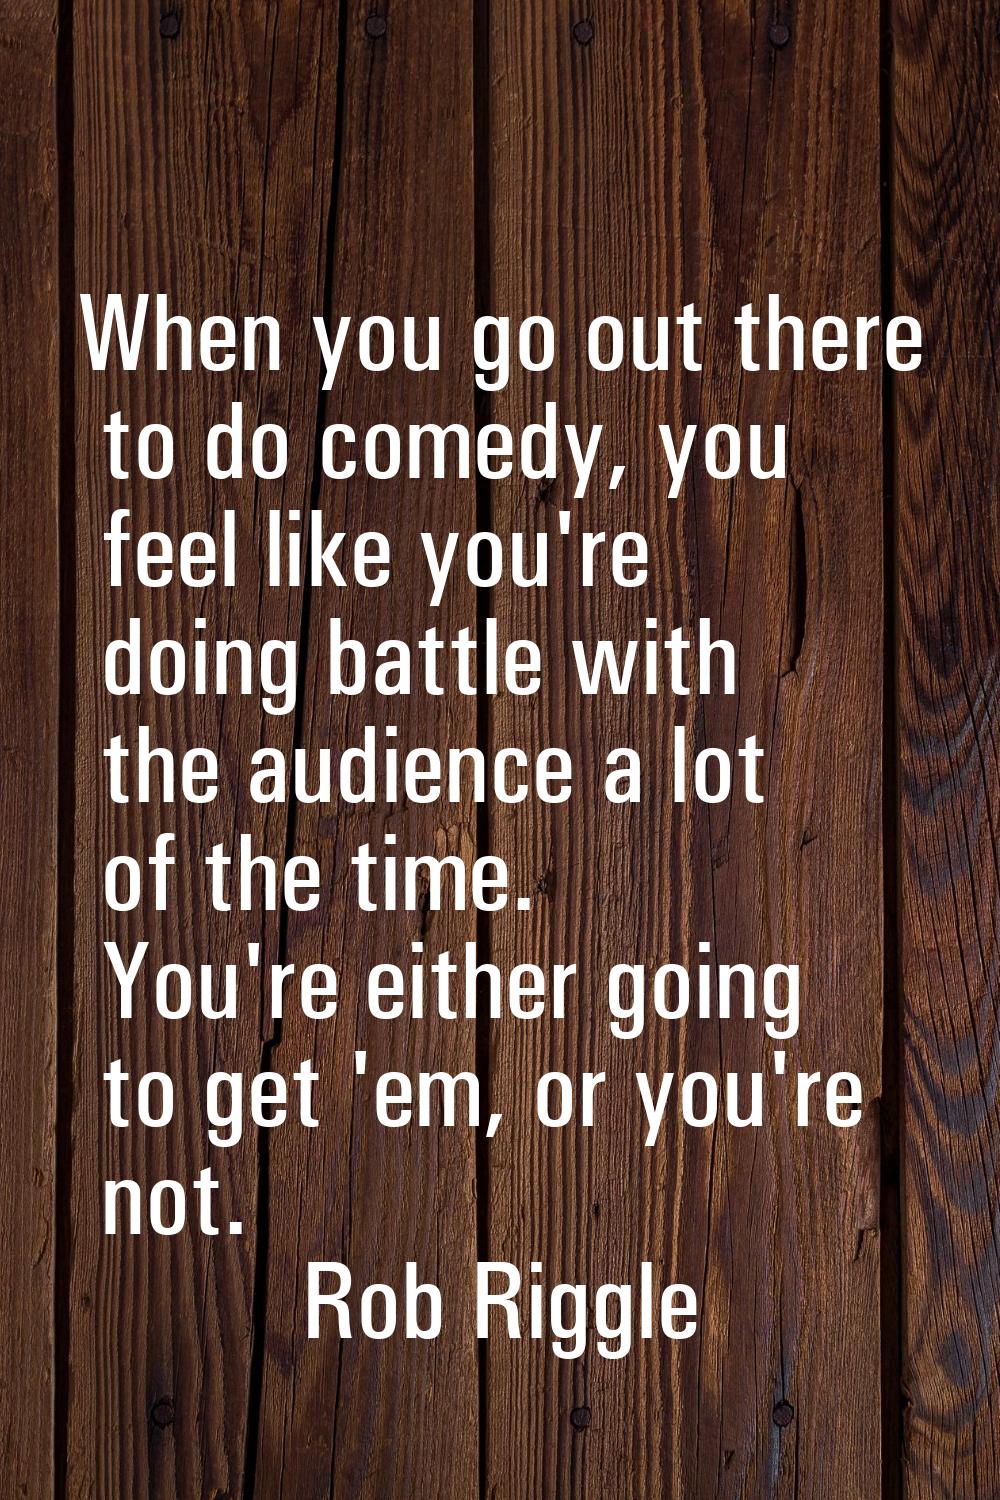 When you go out there to do comedy, you feel like you're doing battle with the audience a lot of th